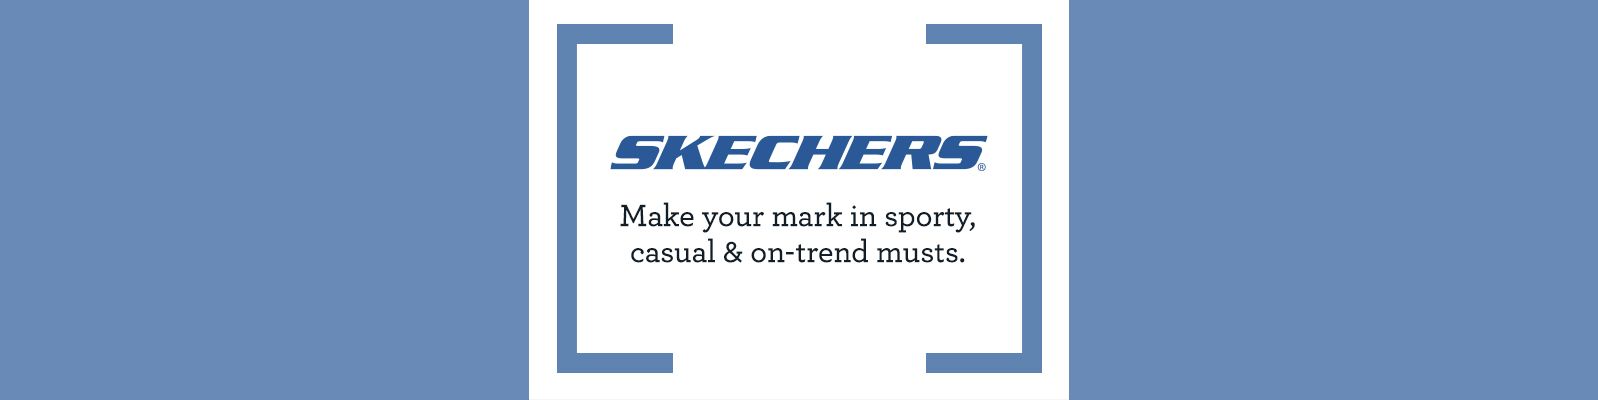 Skechers. Make your mark in sporty, casual & on-trend musts. 